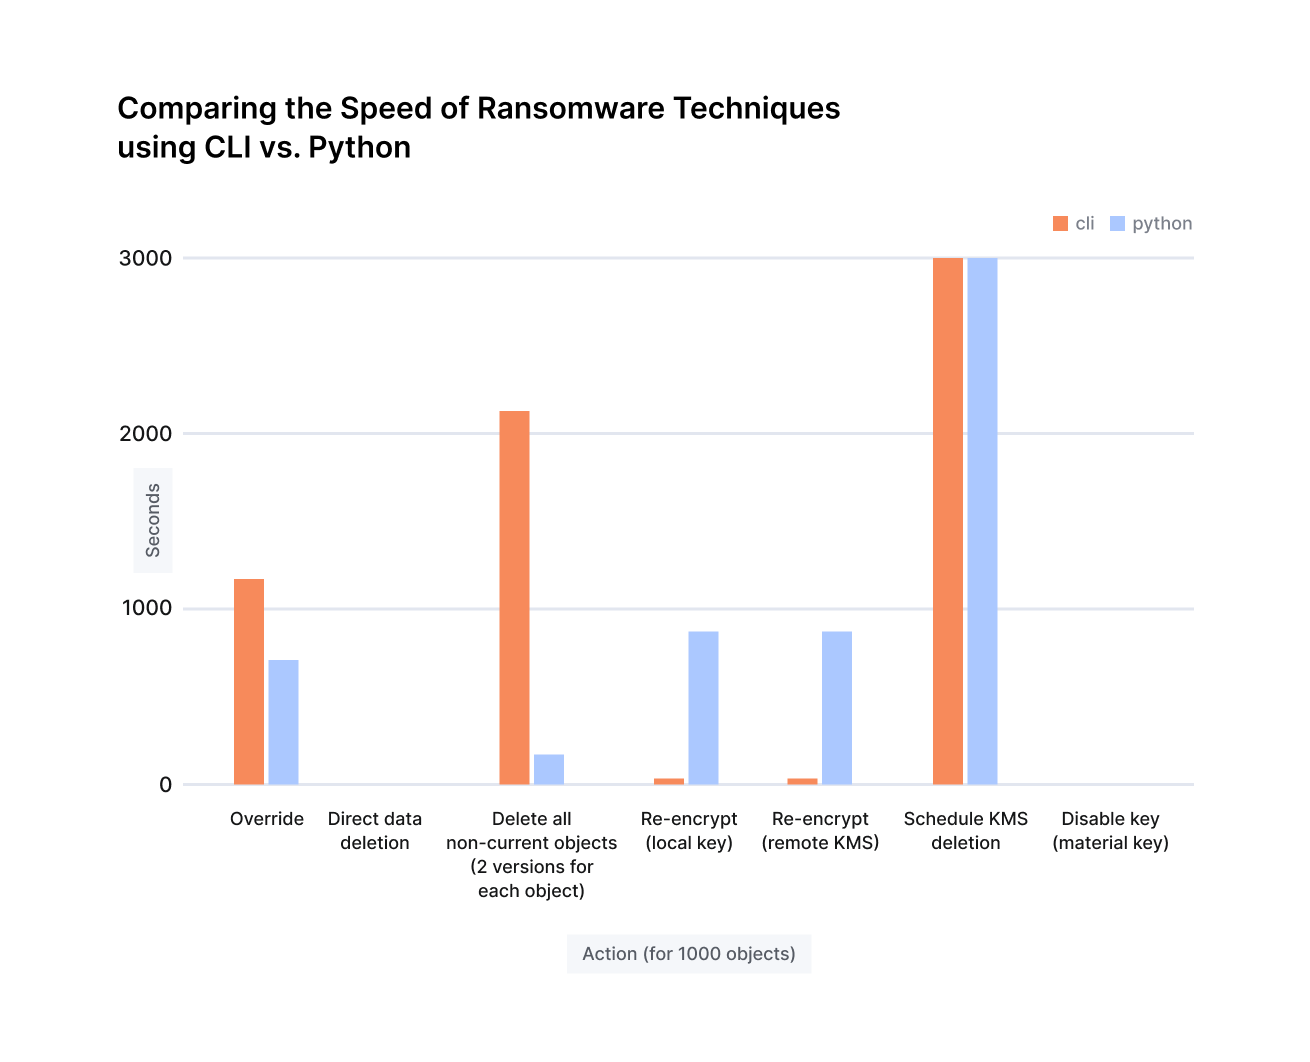 The execution speed of ransomware techniques via CLI and Python scripts on S3 buckets